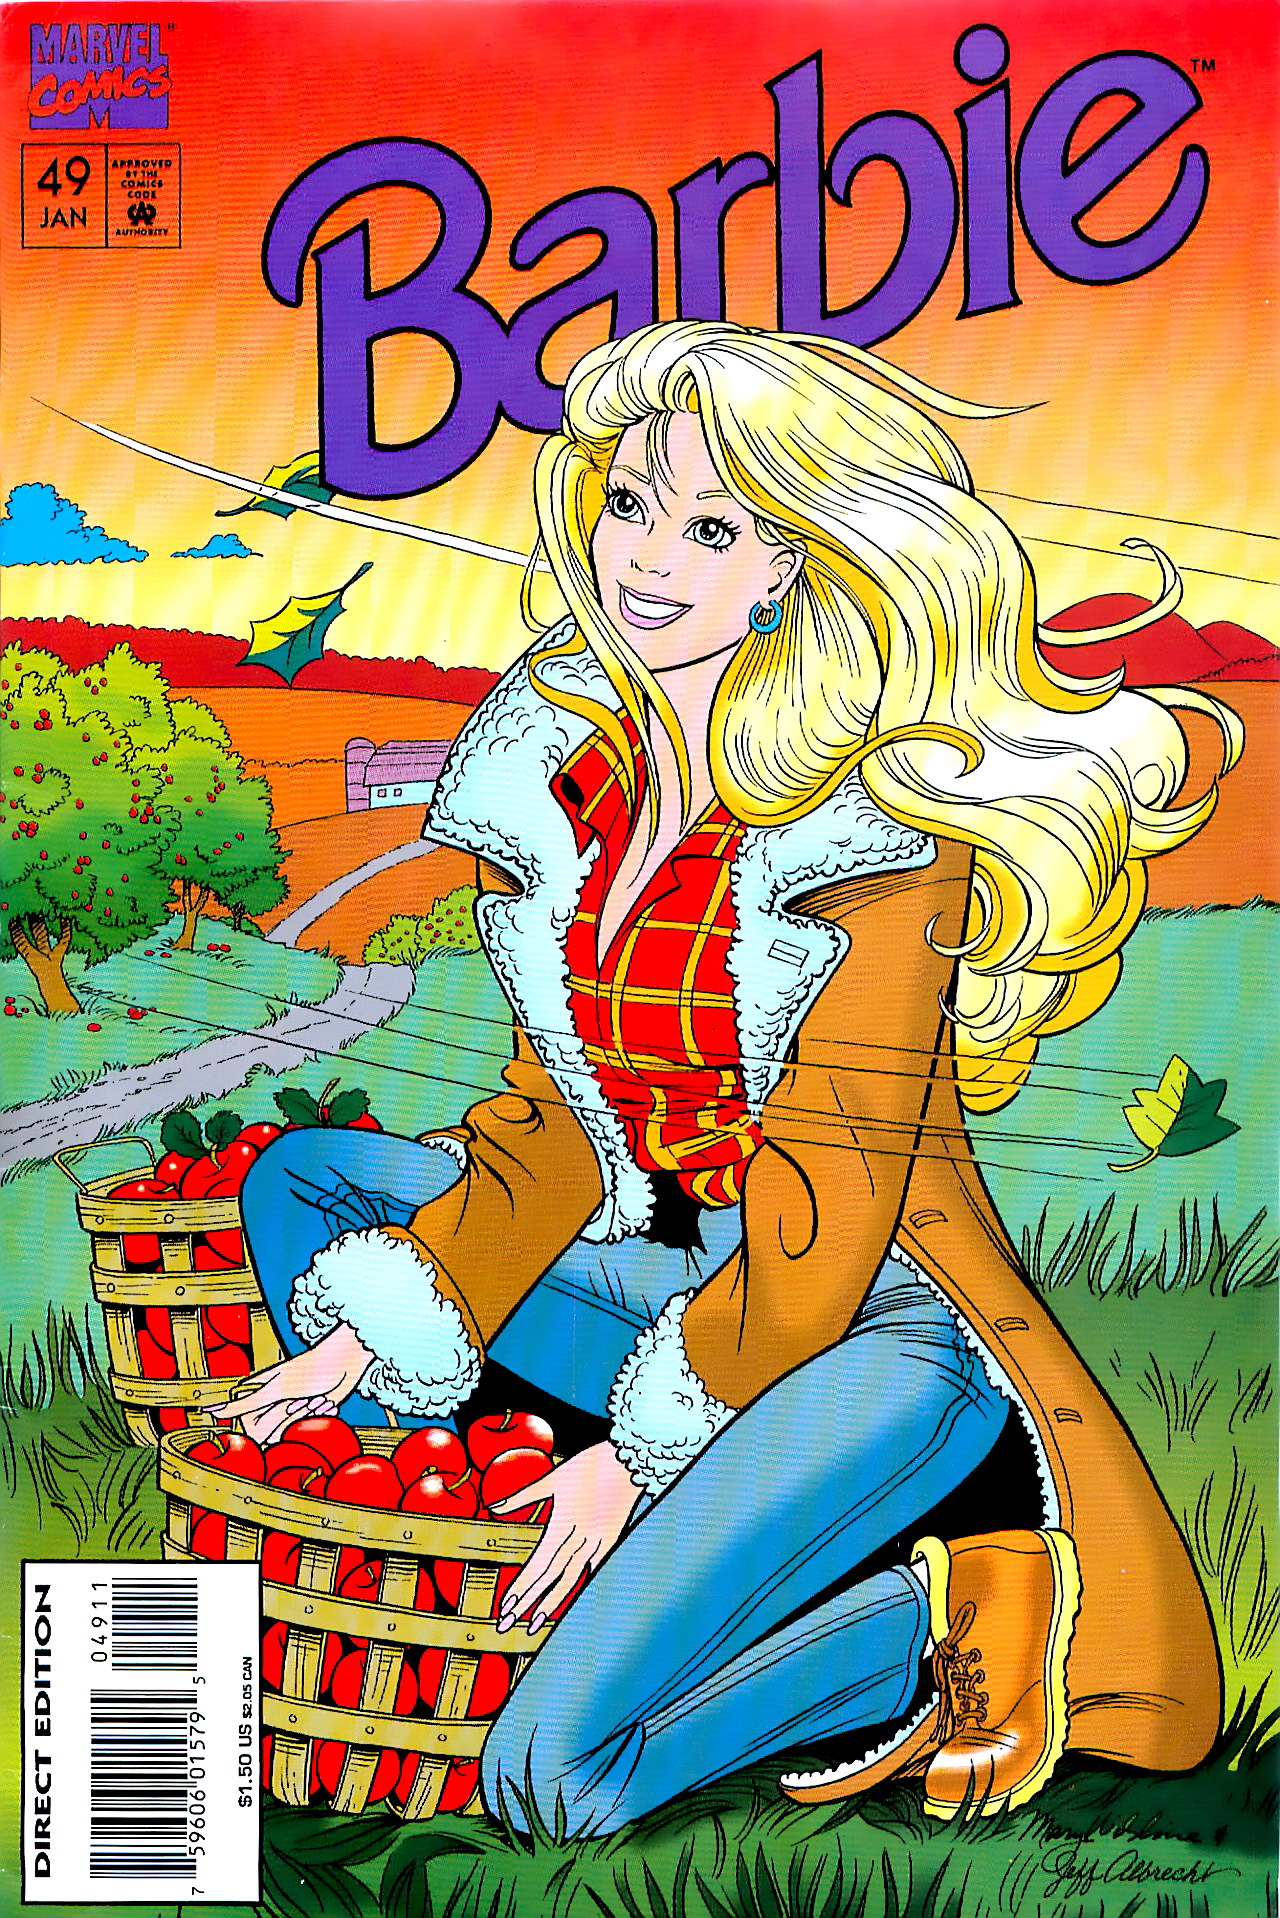 Read online Barbie comic -  Issue #49 - 1